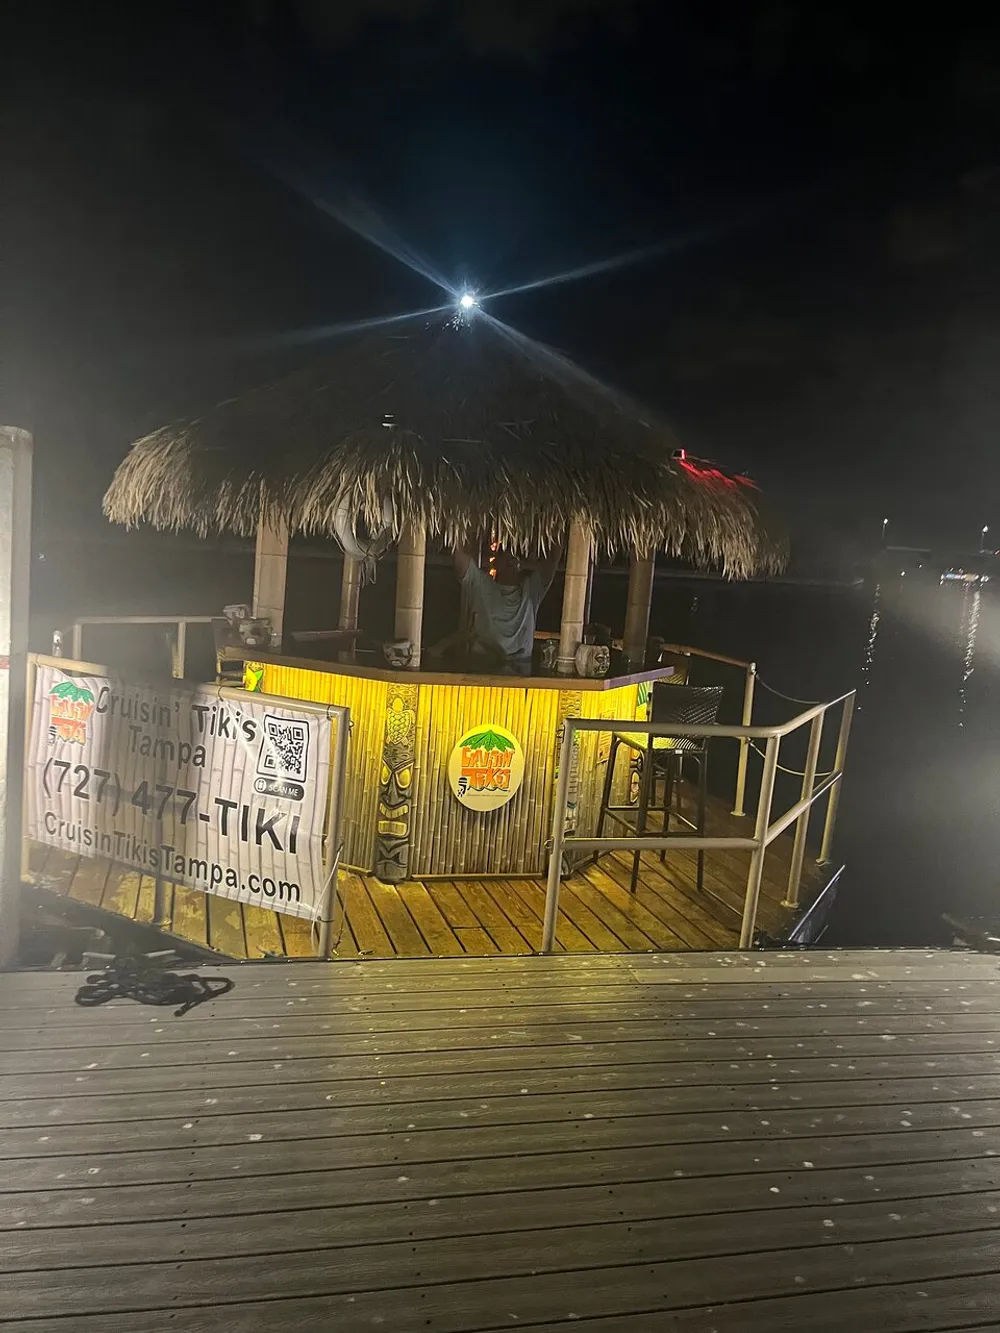 The image shows a thatch-roofed tiki bar by a waterfront at night illuminated with a bright light at the top and signage promoting a cruising tiki experience